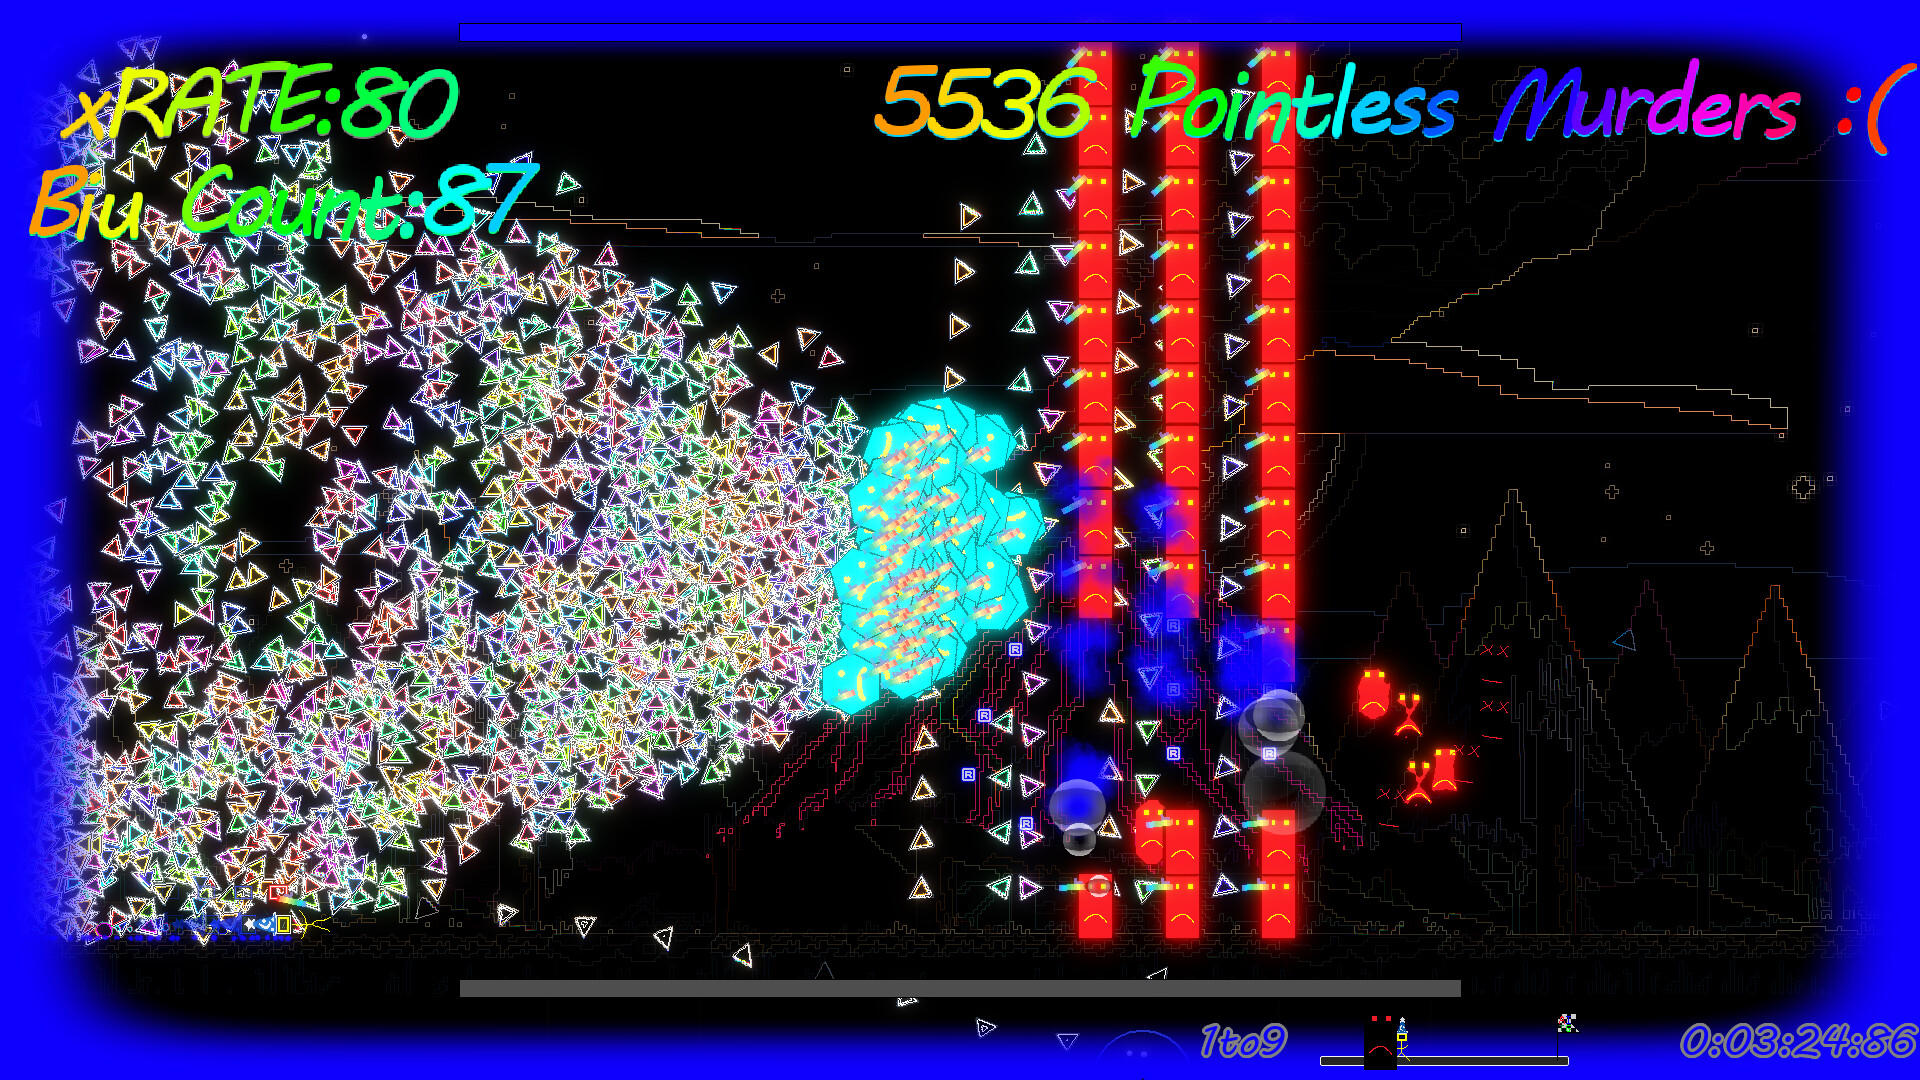 A2C:Ayry seems to be playtesting a 2D runner shooter from Cci screenshot game